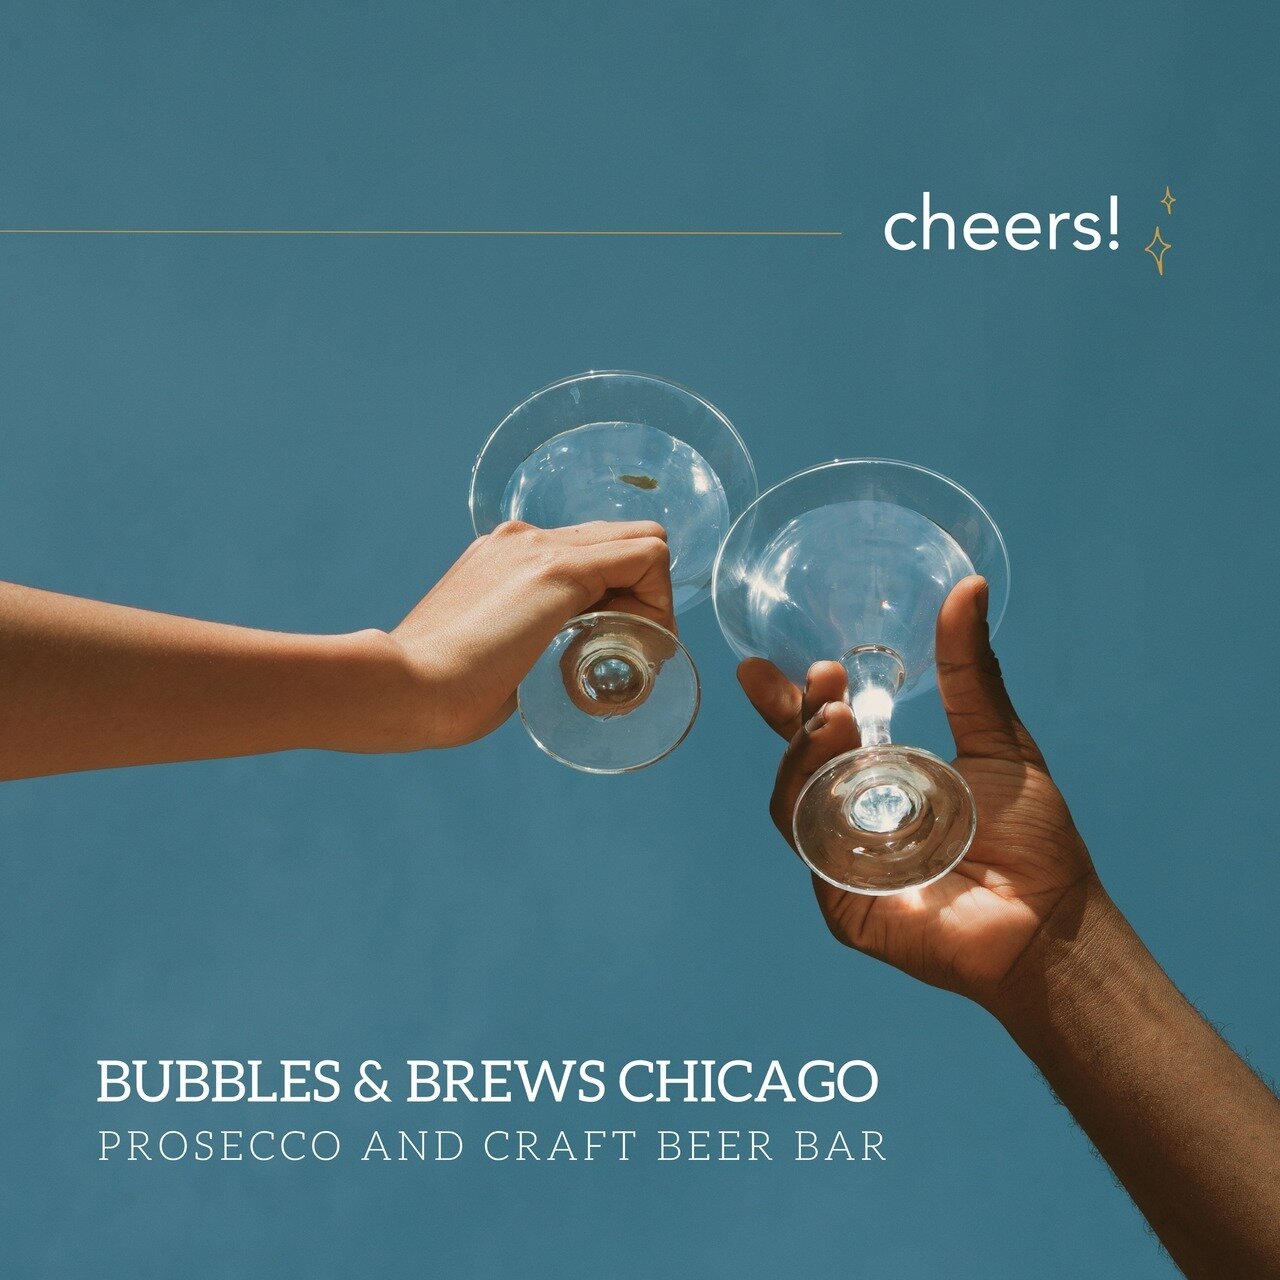 We see you... &amp; you won't hurt our feelings if you are working with a caterer for your event! They are more than welcome to staff and stock the bar. 🍸️ DM us and ask more about how our mobile bar cart works! // #BubblesAndBrews #CheersChicago #C